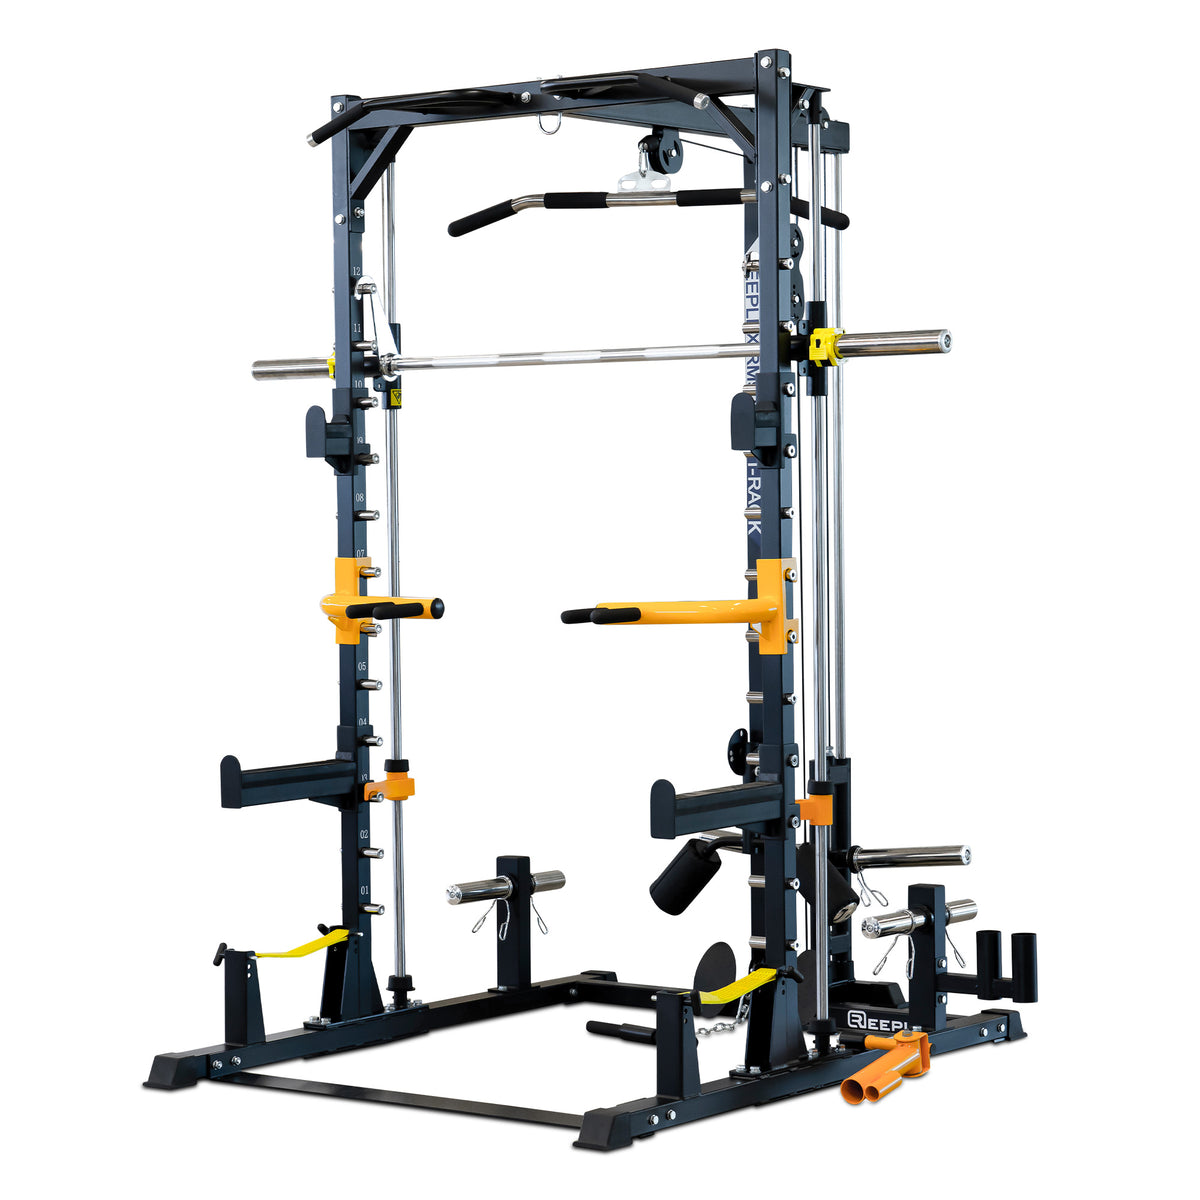 Reeplex RM90 Squat Rack with Smith Machine and Lat Pulldown + Seated Row